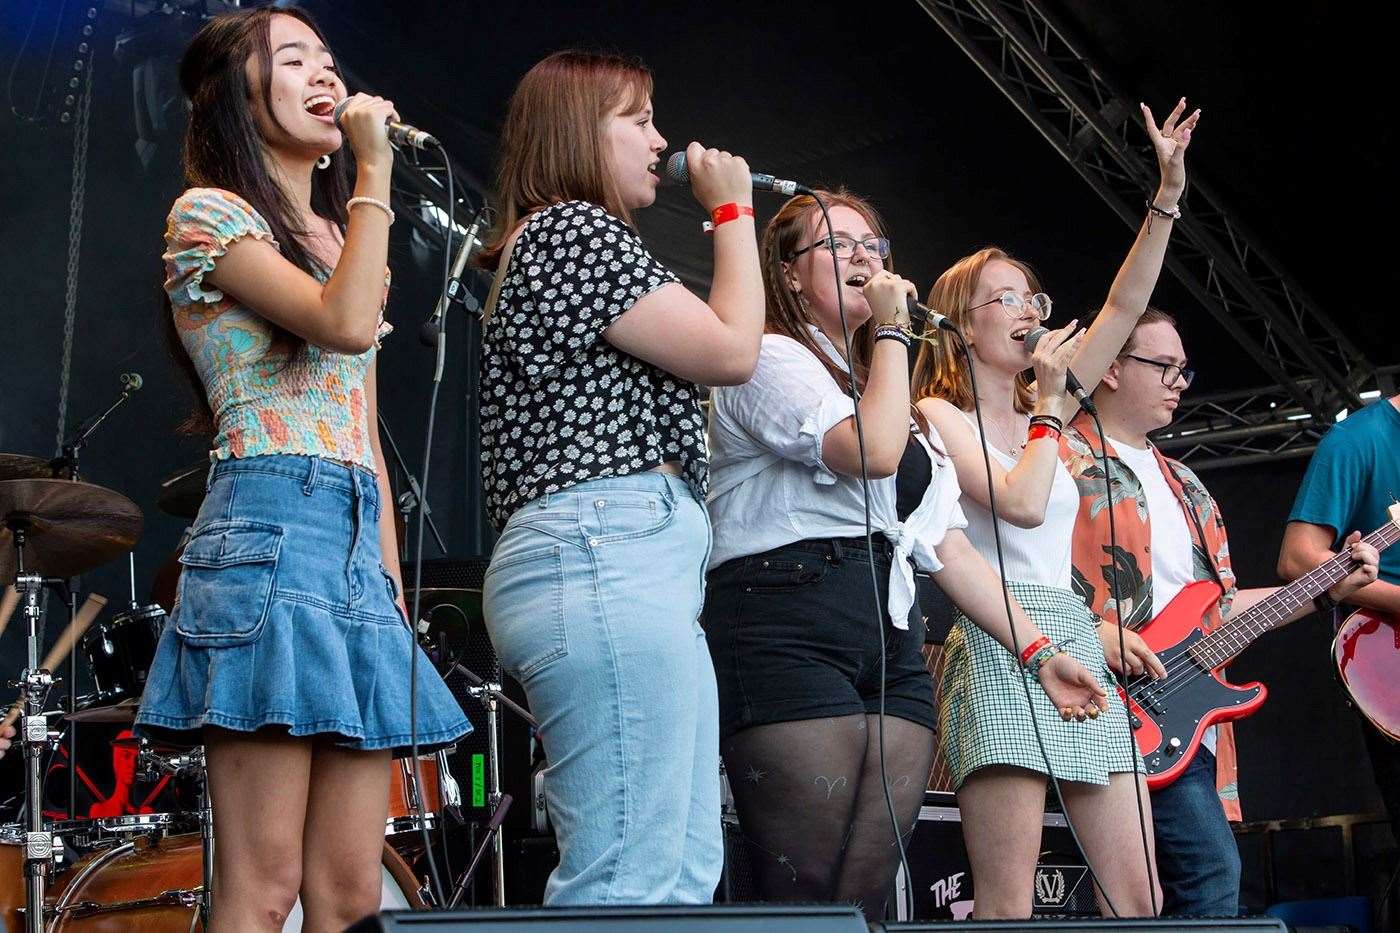 The Walk-man are a group of nine teenagers that opened Festival Too on Saturday night